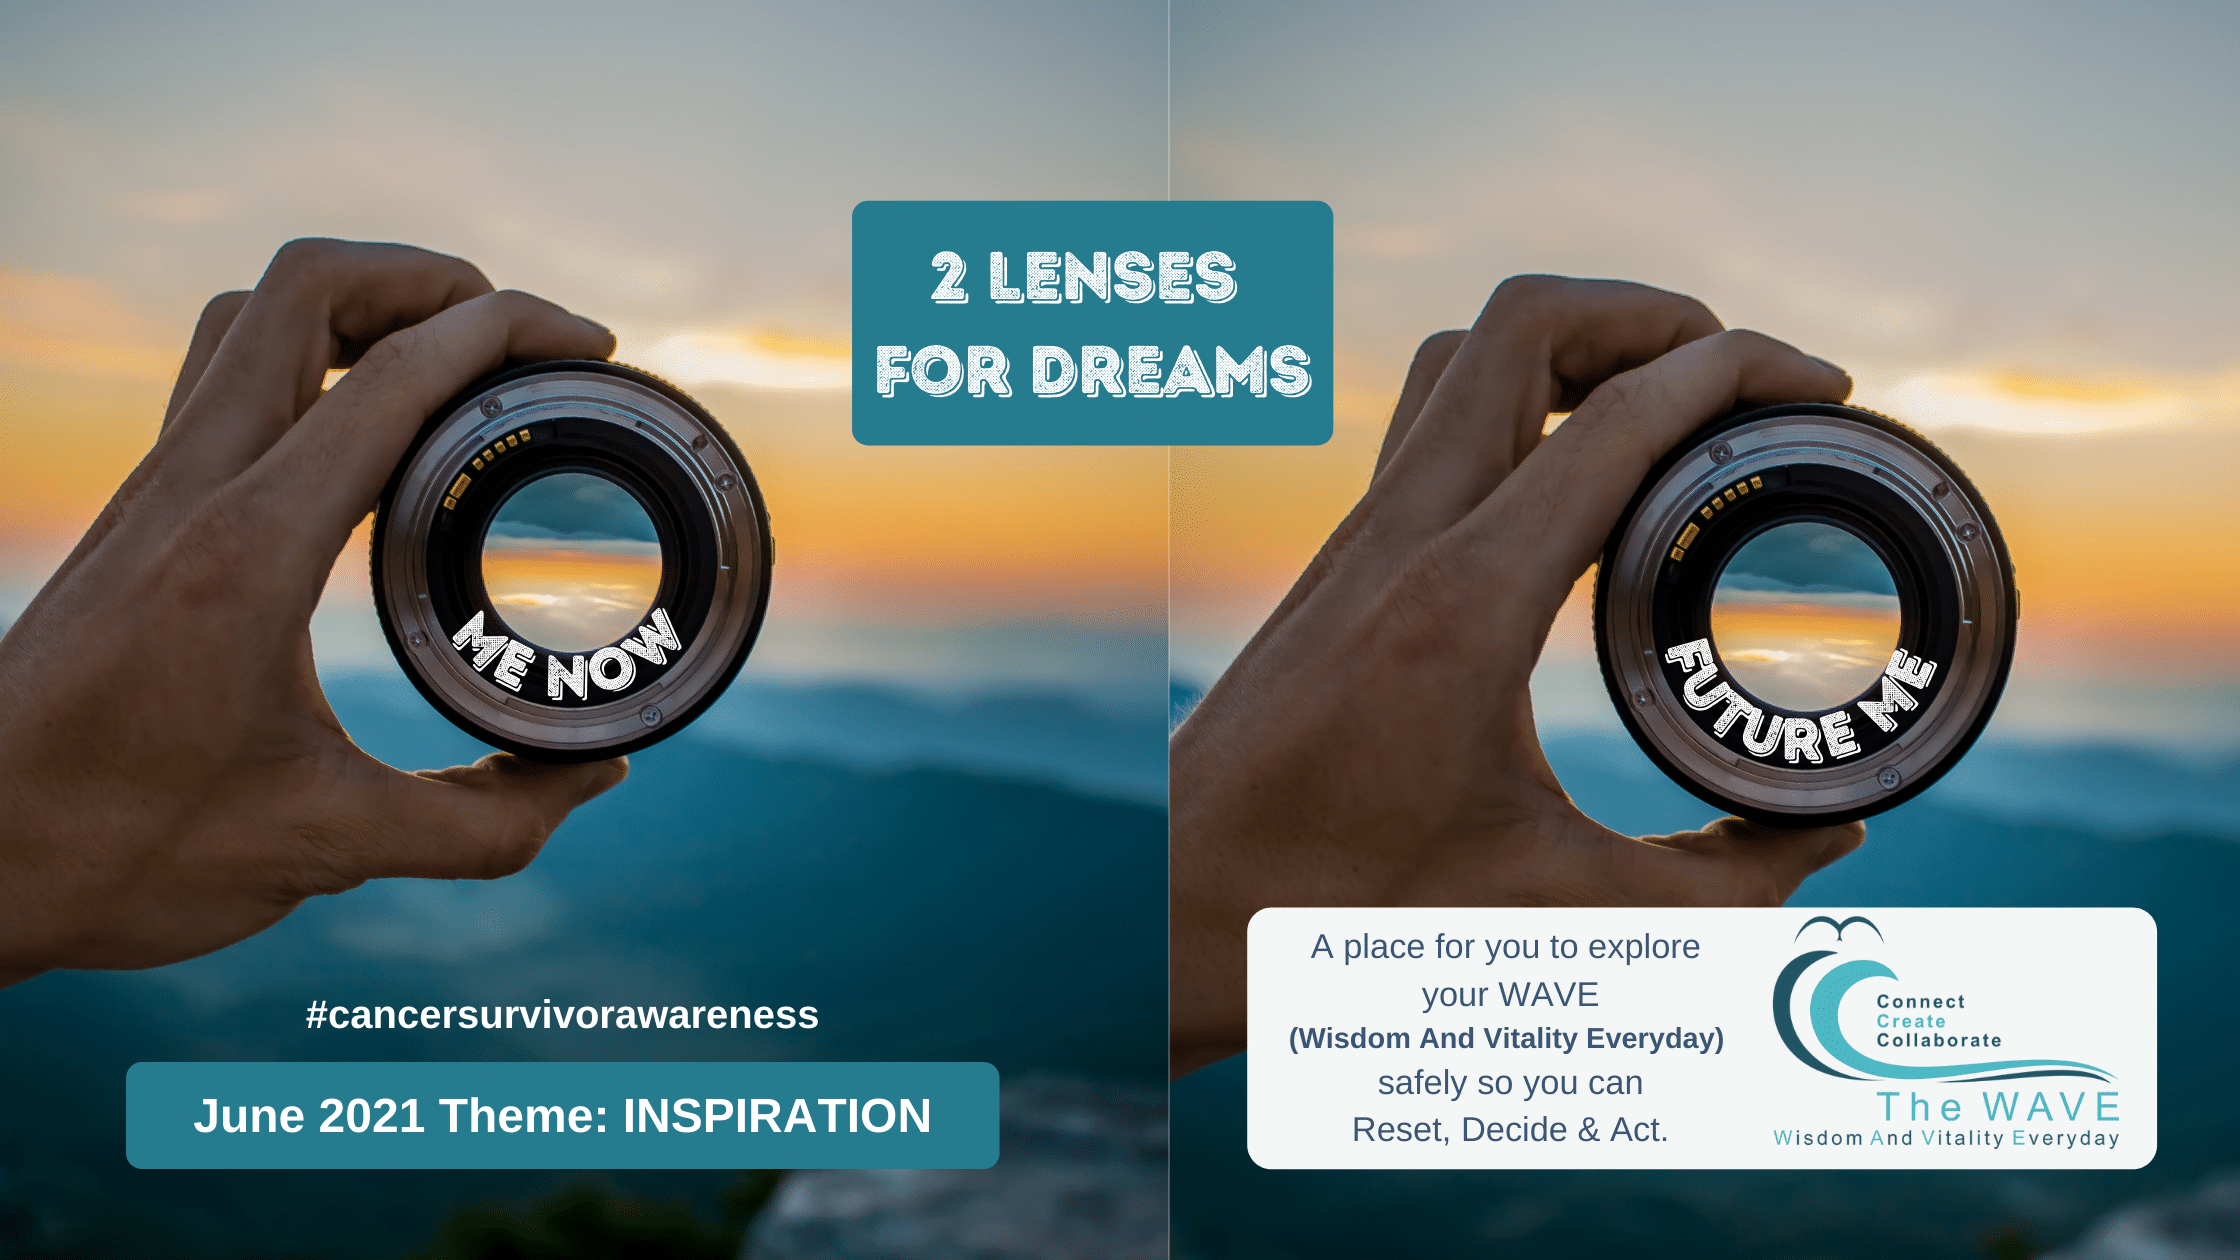 Two lenses for dreams